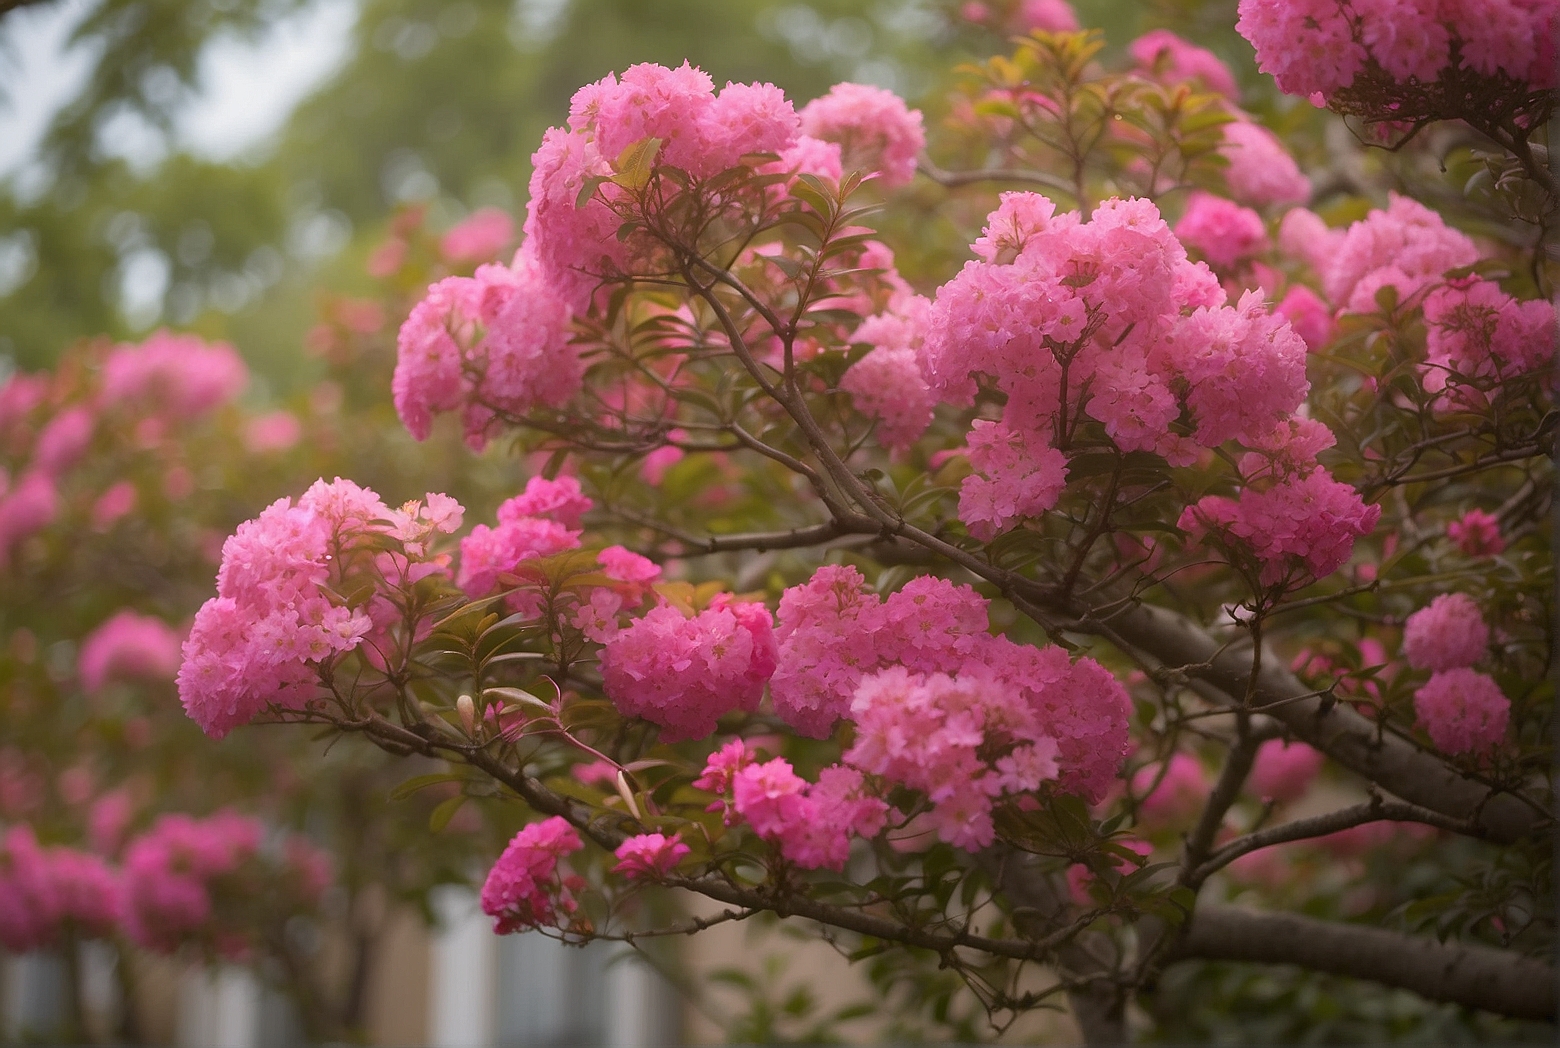 How to Prune Crepe Myrtle in the Summer